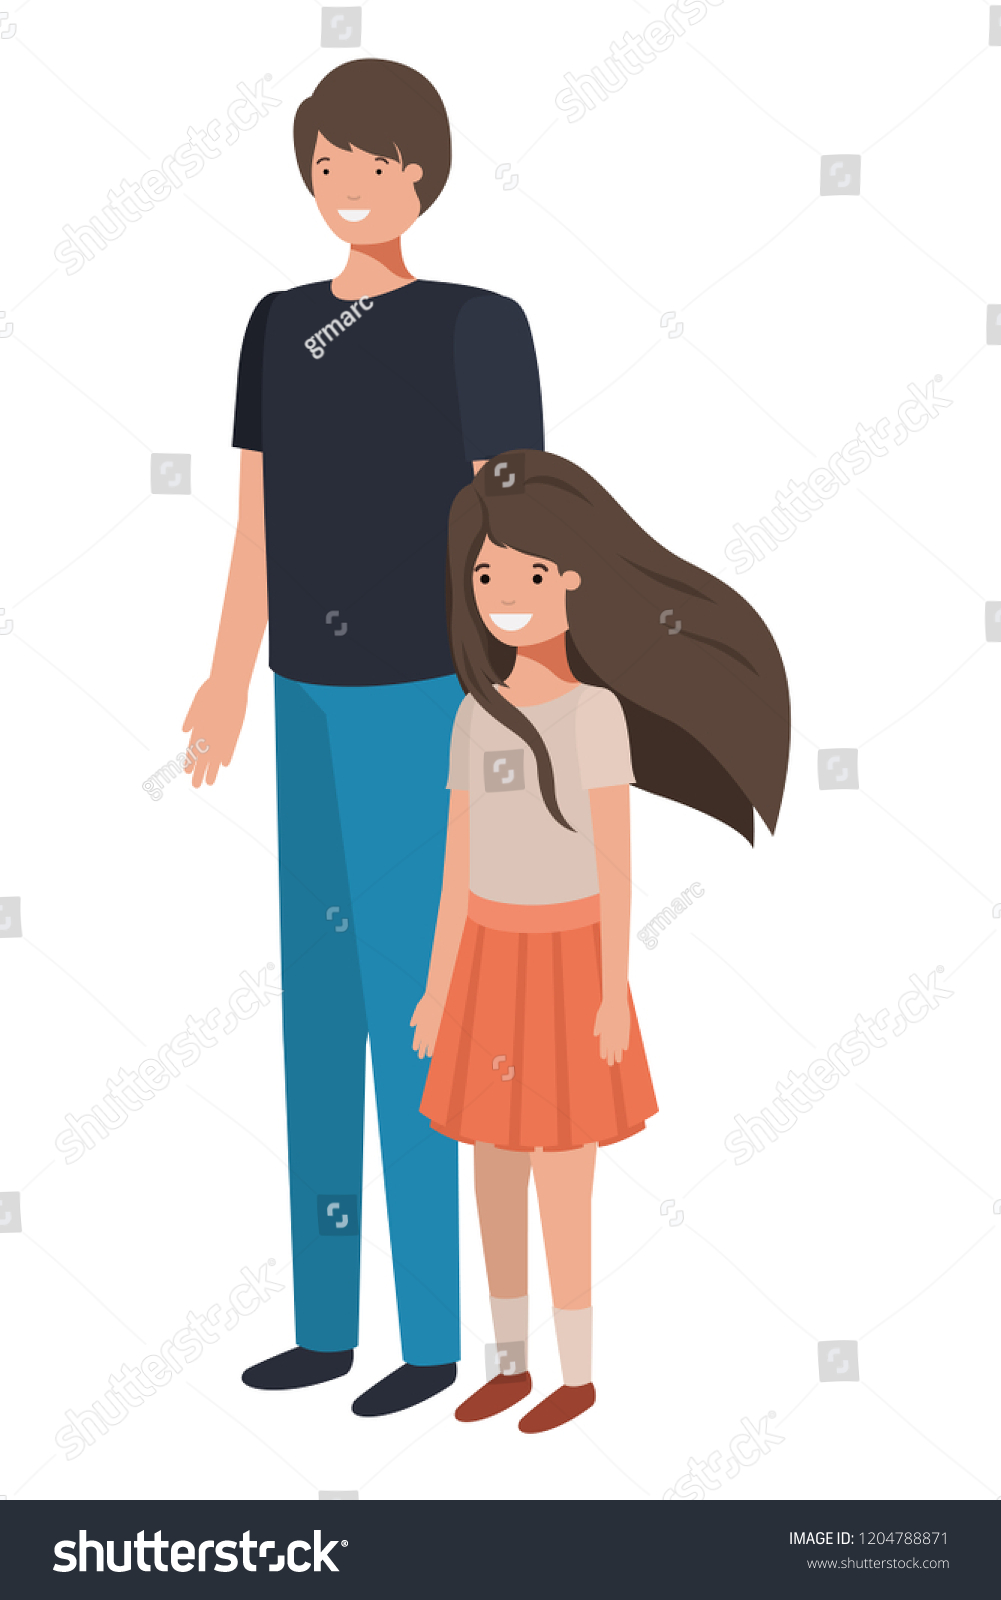 Father And Daughter Smiling Avatar Character Royalty Free Stock Vector 1204788871